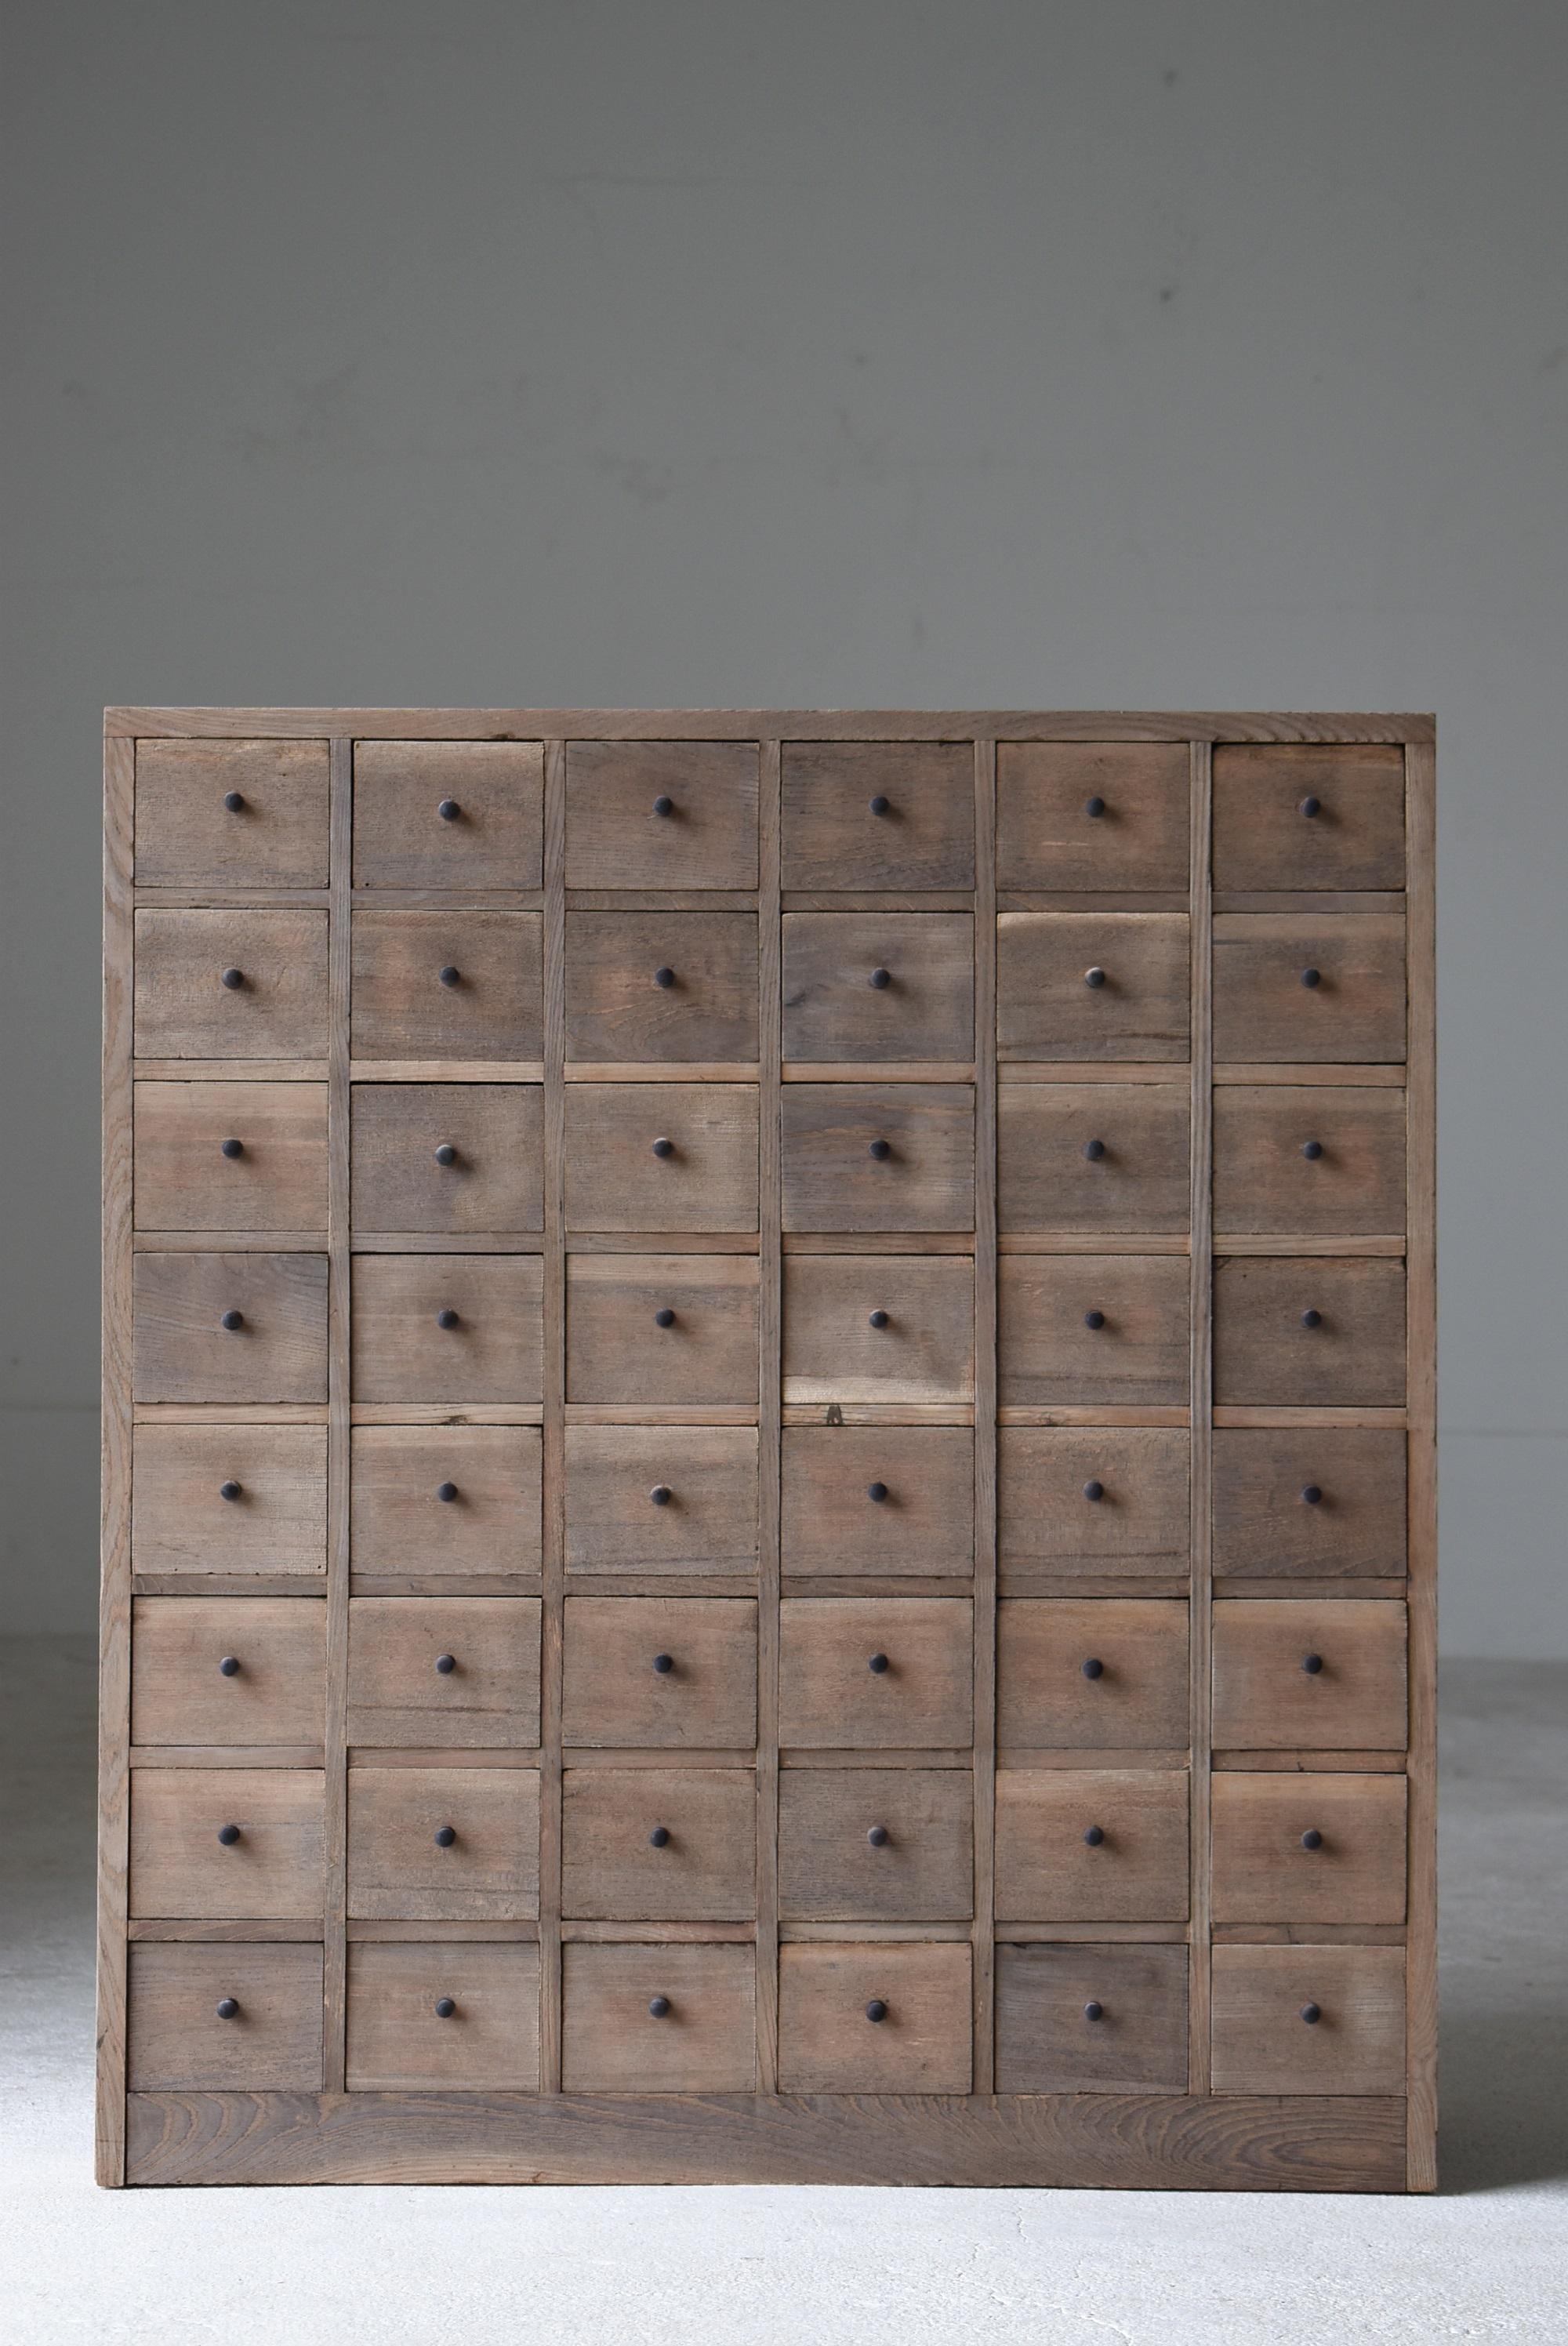 Japanese Antique Medicine Chest 1860s-1900s/Chests of Drawers Storage Tansu 2